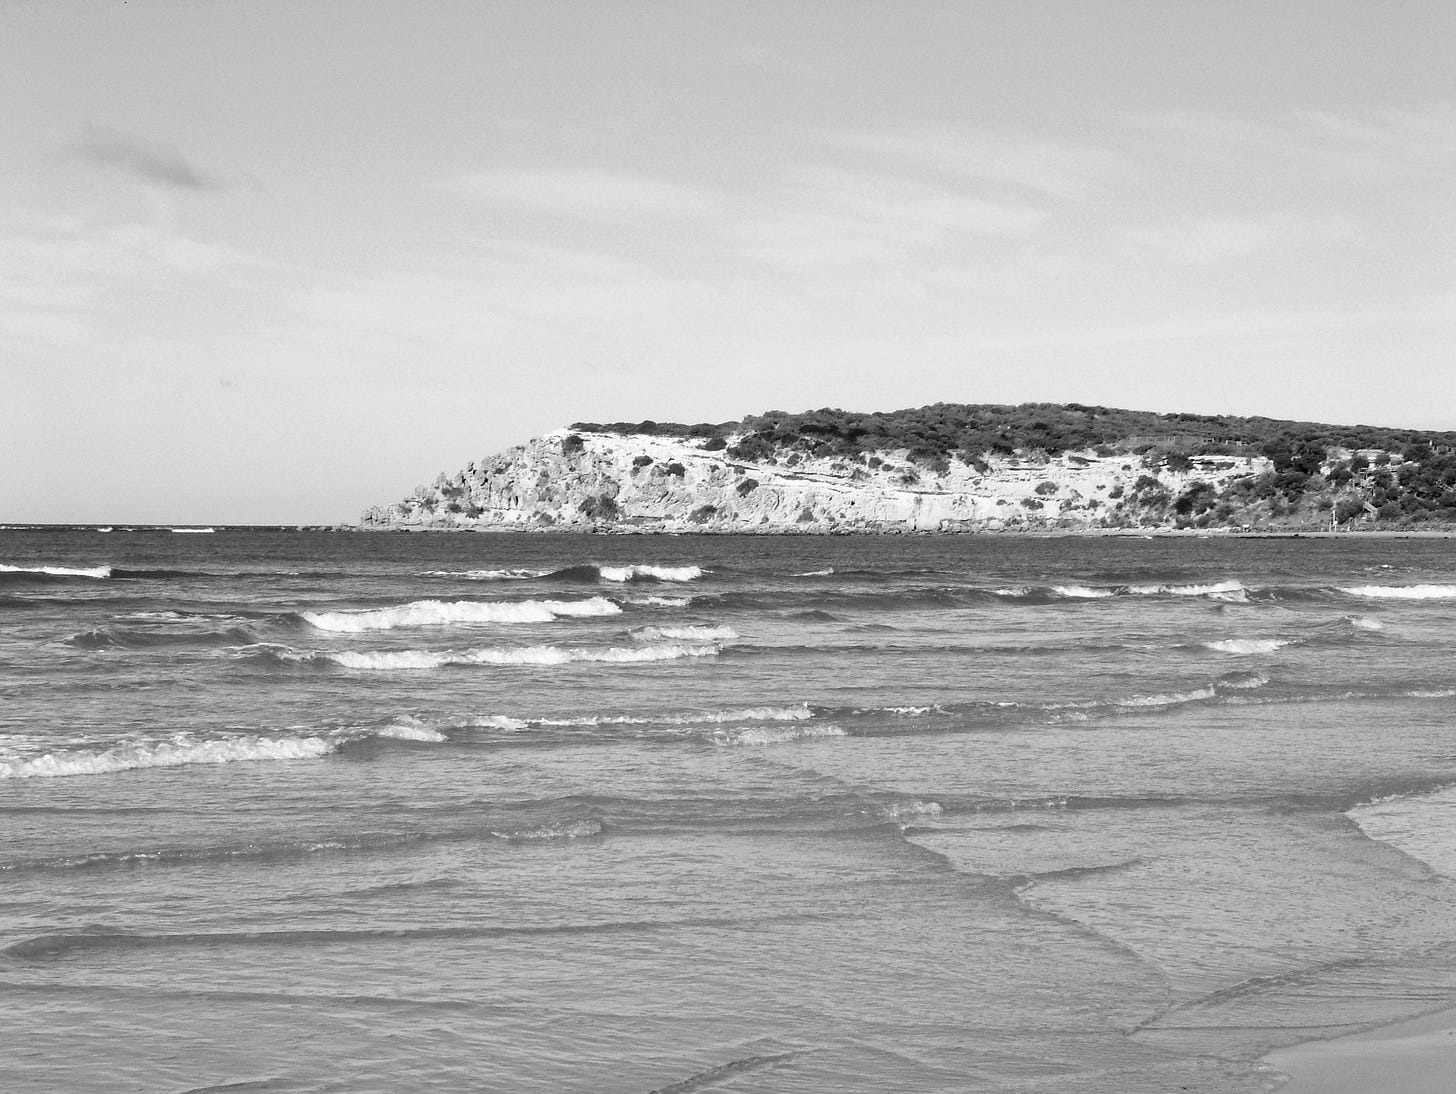 Rocky headland viewed from across a river estuary; waves breaking on the beach.